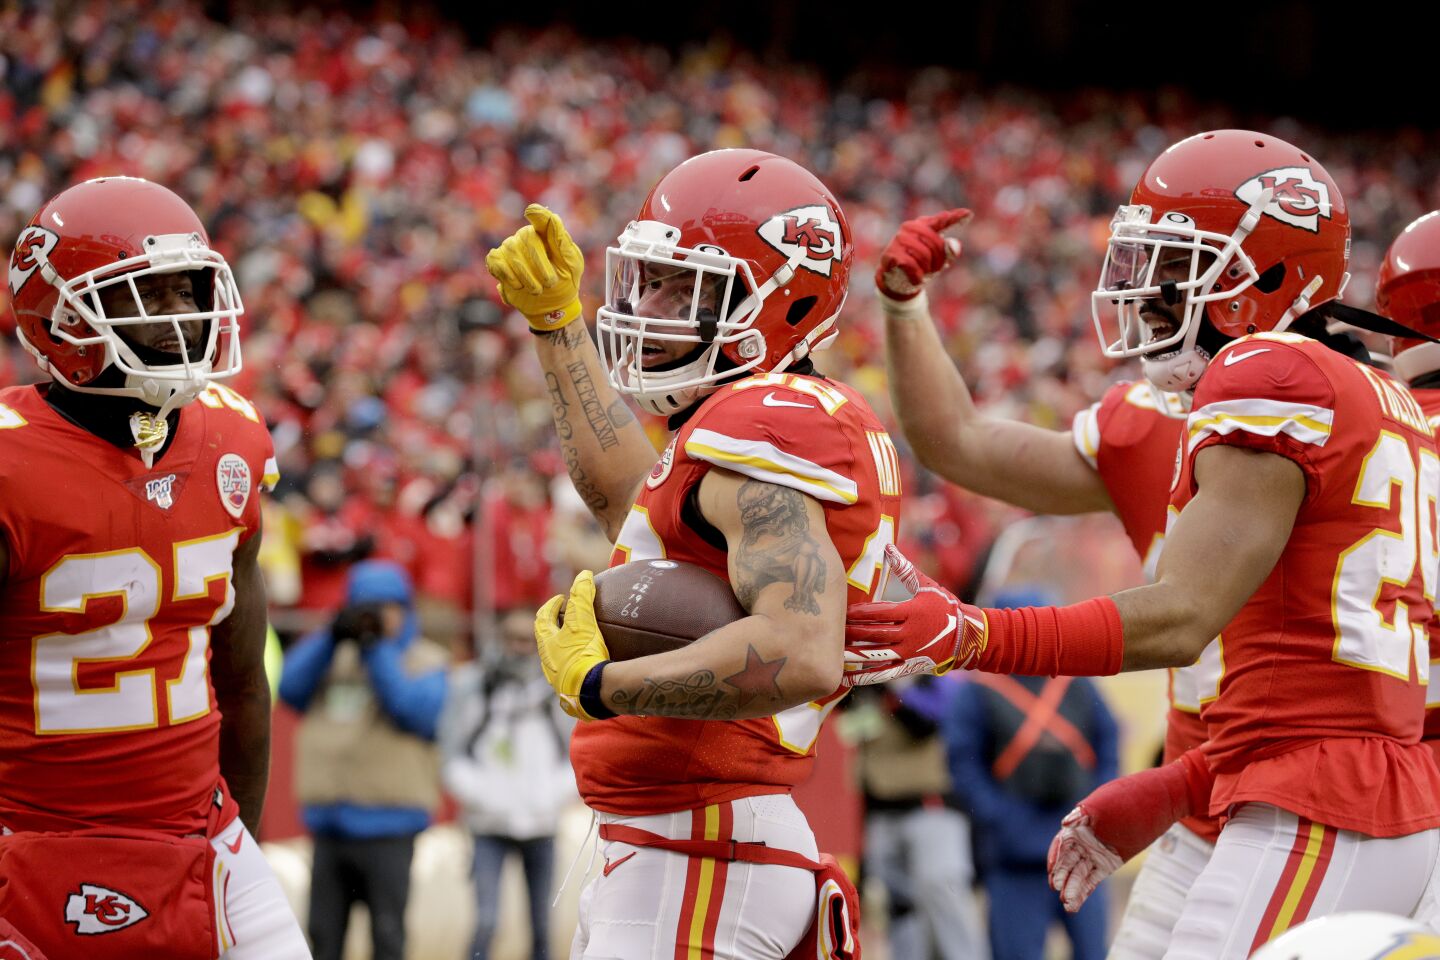 Chiefs safety Tyrann Mathieu celebrates with his teammates after intercepting a pass from Chargers quarterback Philip Rivers during a game Dec. 29.